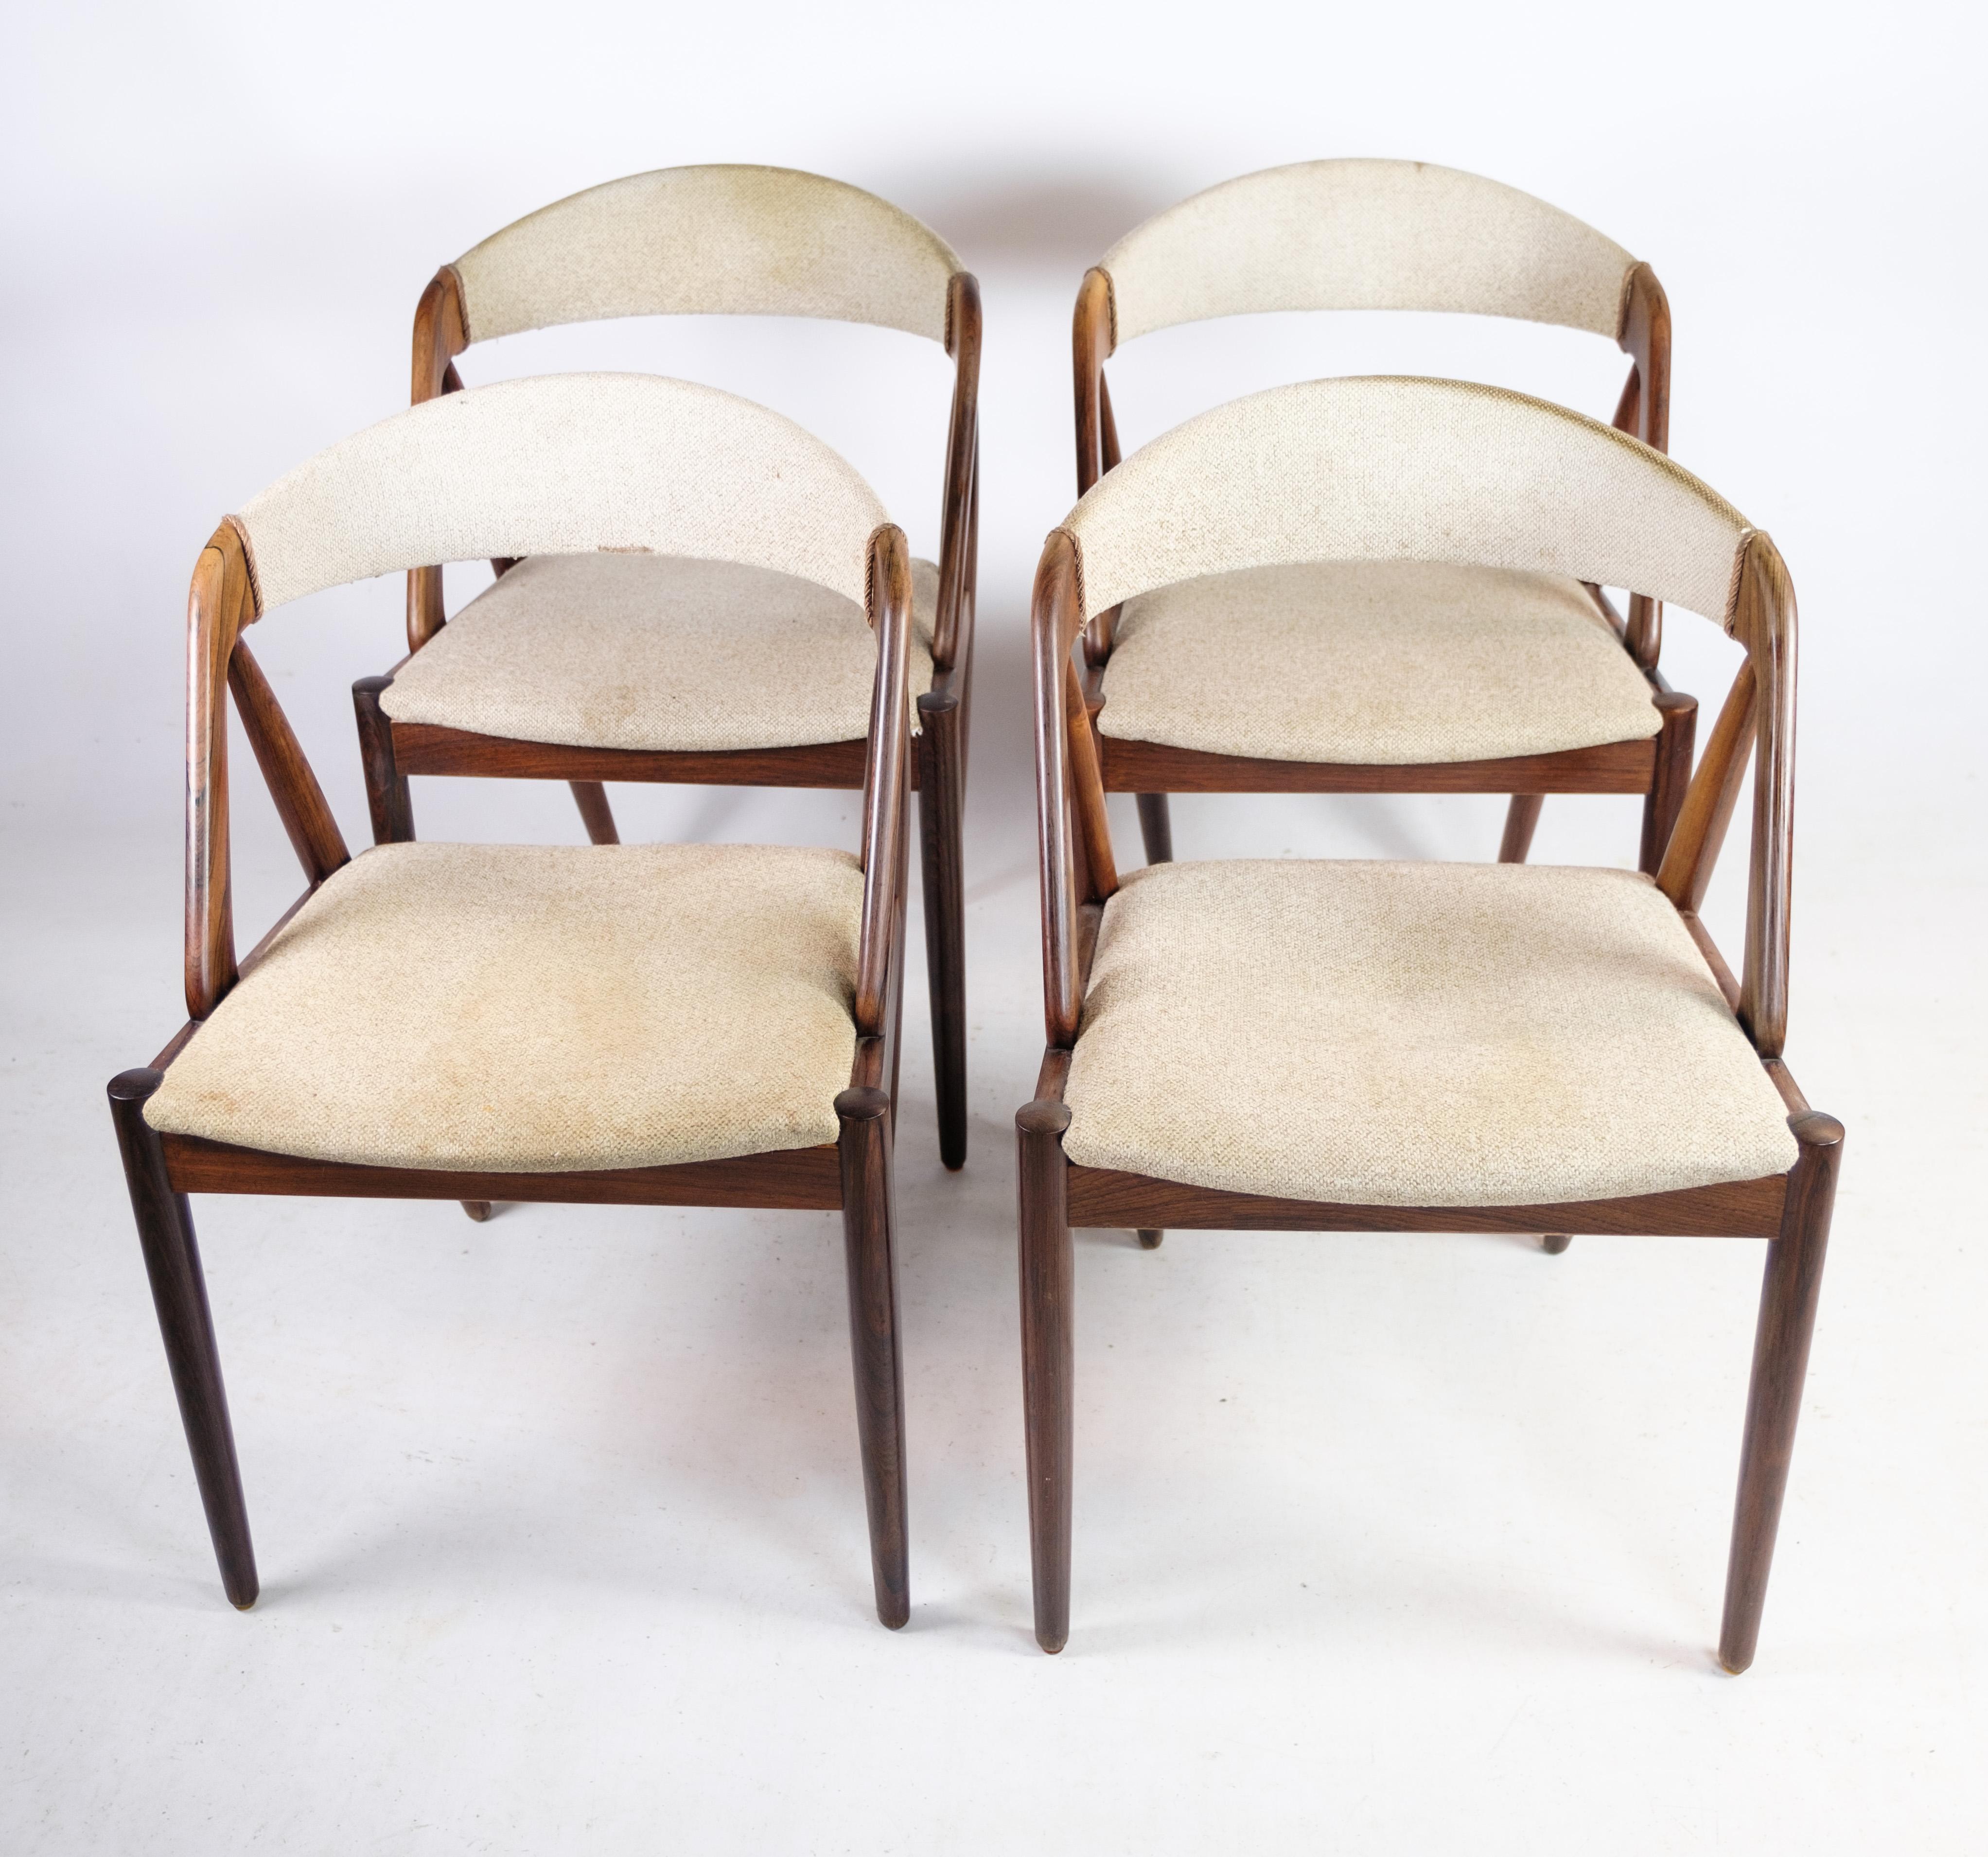 A set of four dining room chairs, model 31, designed by the renowned Danish designer Kai Kristiansen around the 1960s. These exquisite chairs are crafted with rosewood frames by Schou Andersen, showcasing the timeless elegance of mid-century Danish